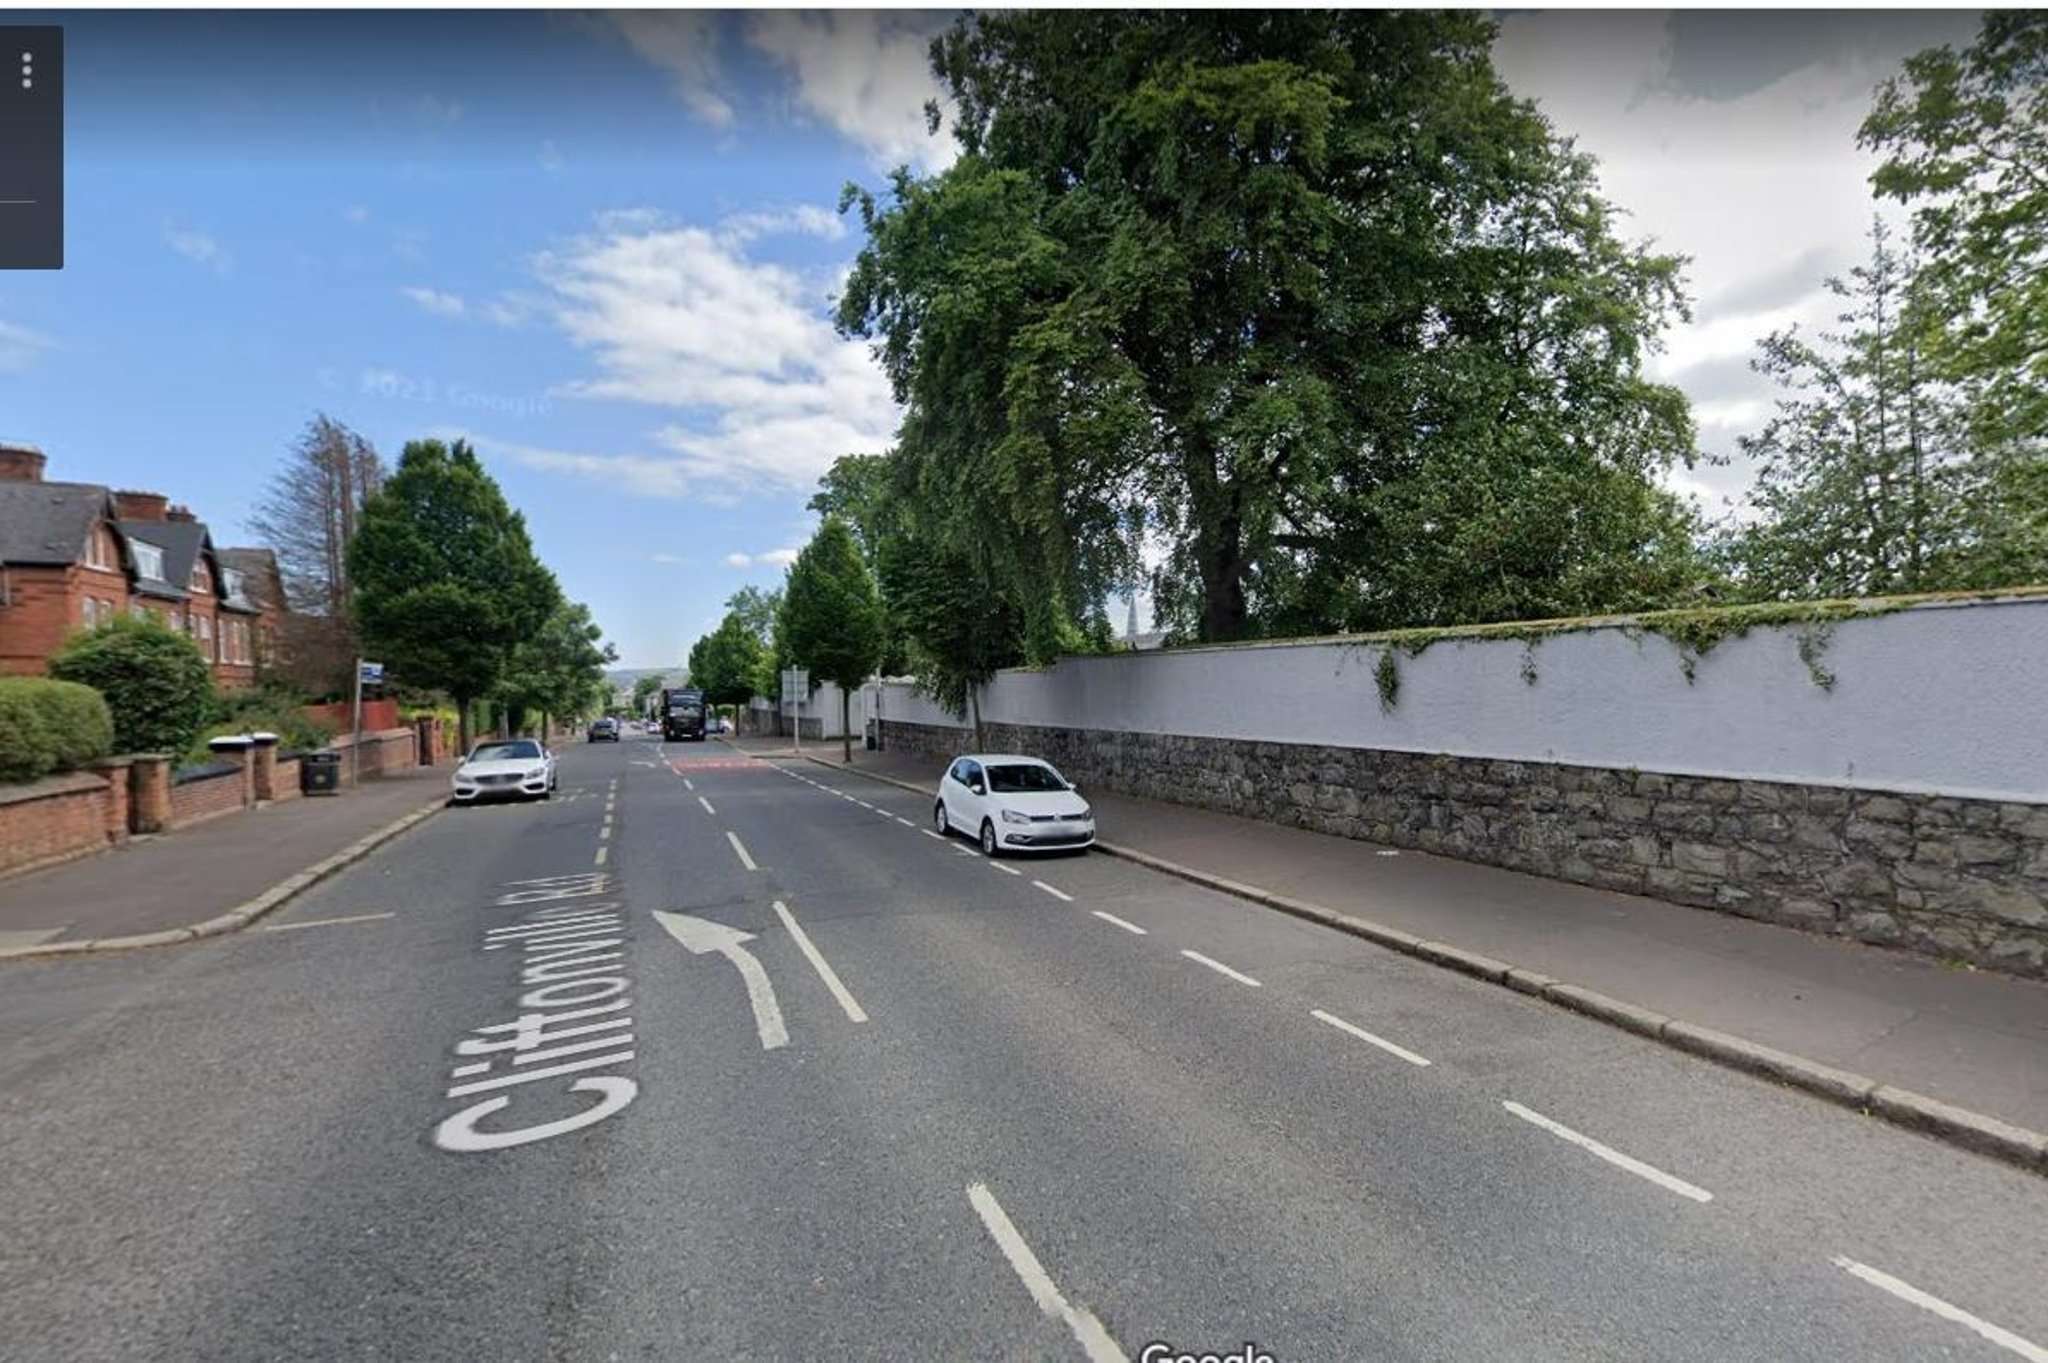 Cyclist sustains head and leg injuries in city collision - PSNI appeal for witnesses